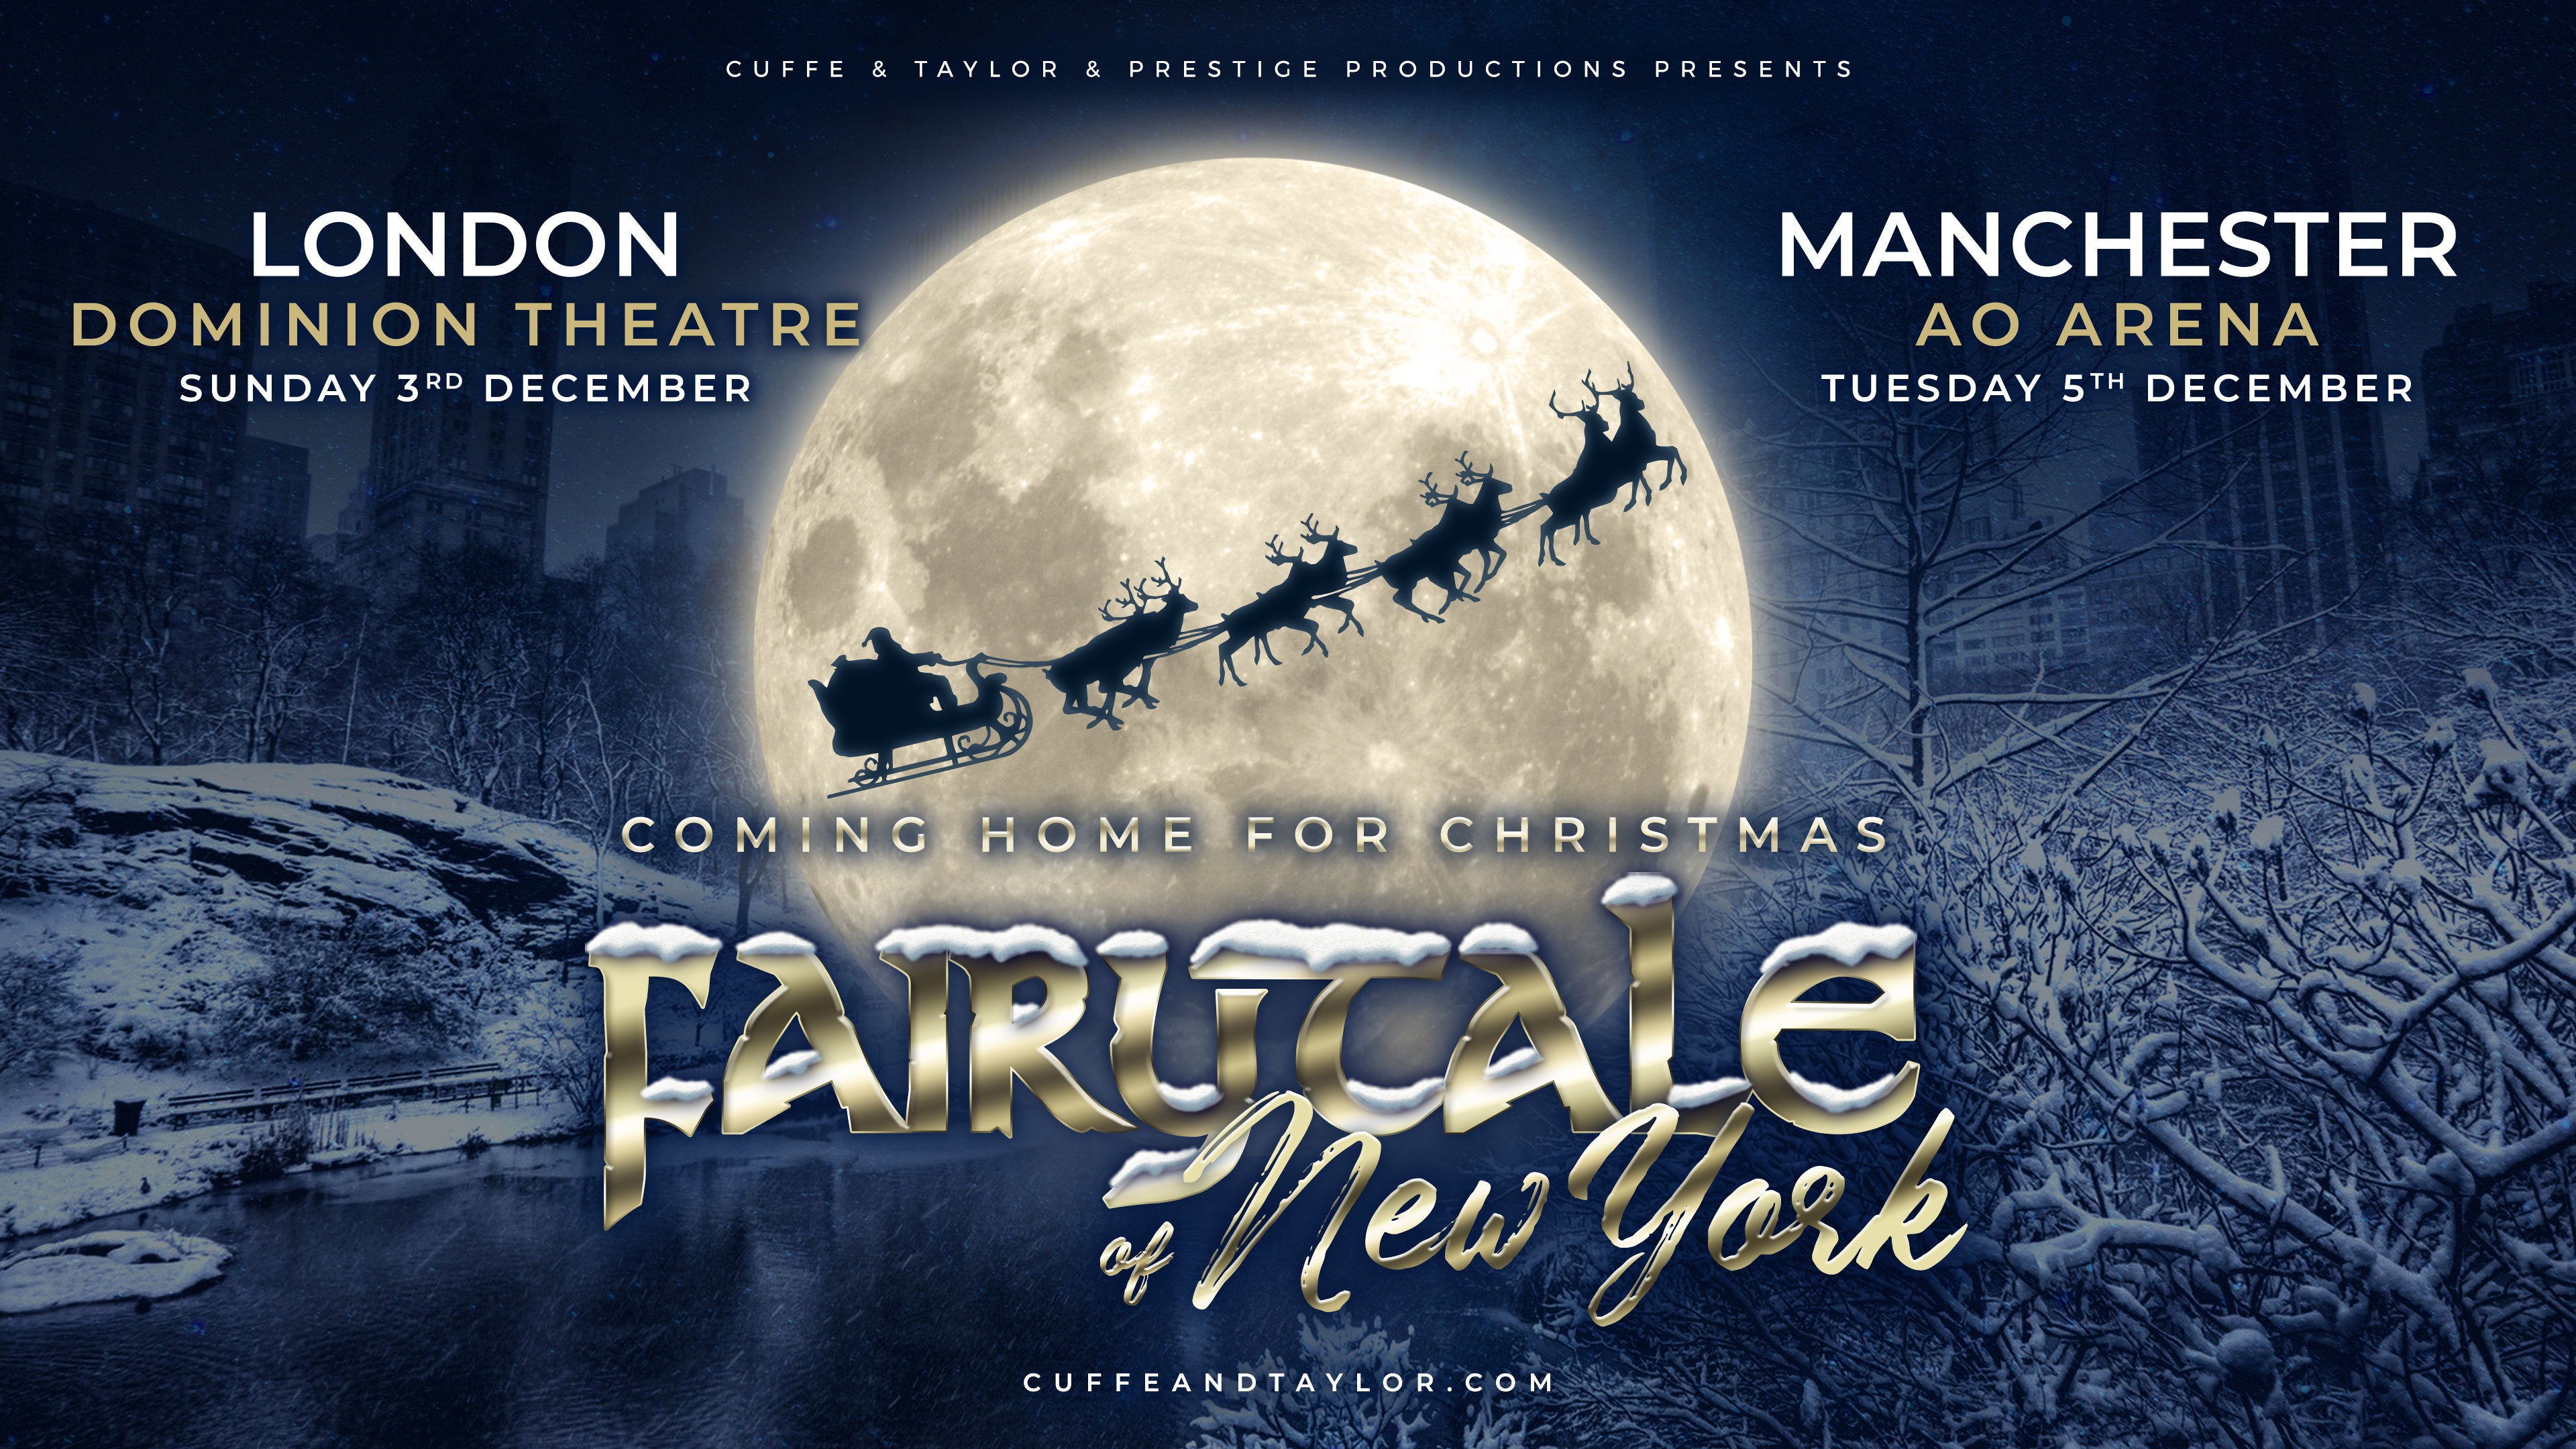 Fairytale of New York in Manchester promo photo for Live Nation presale offer code